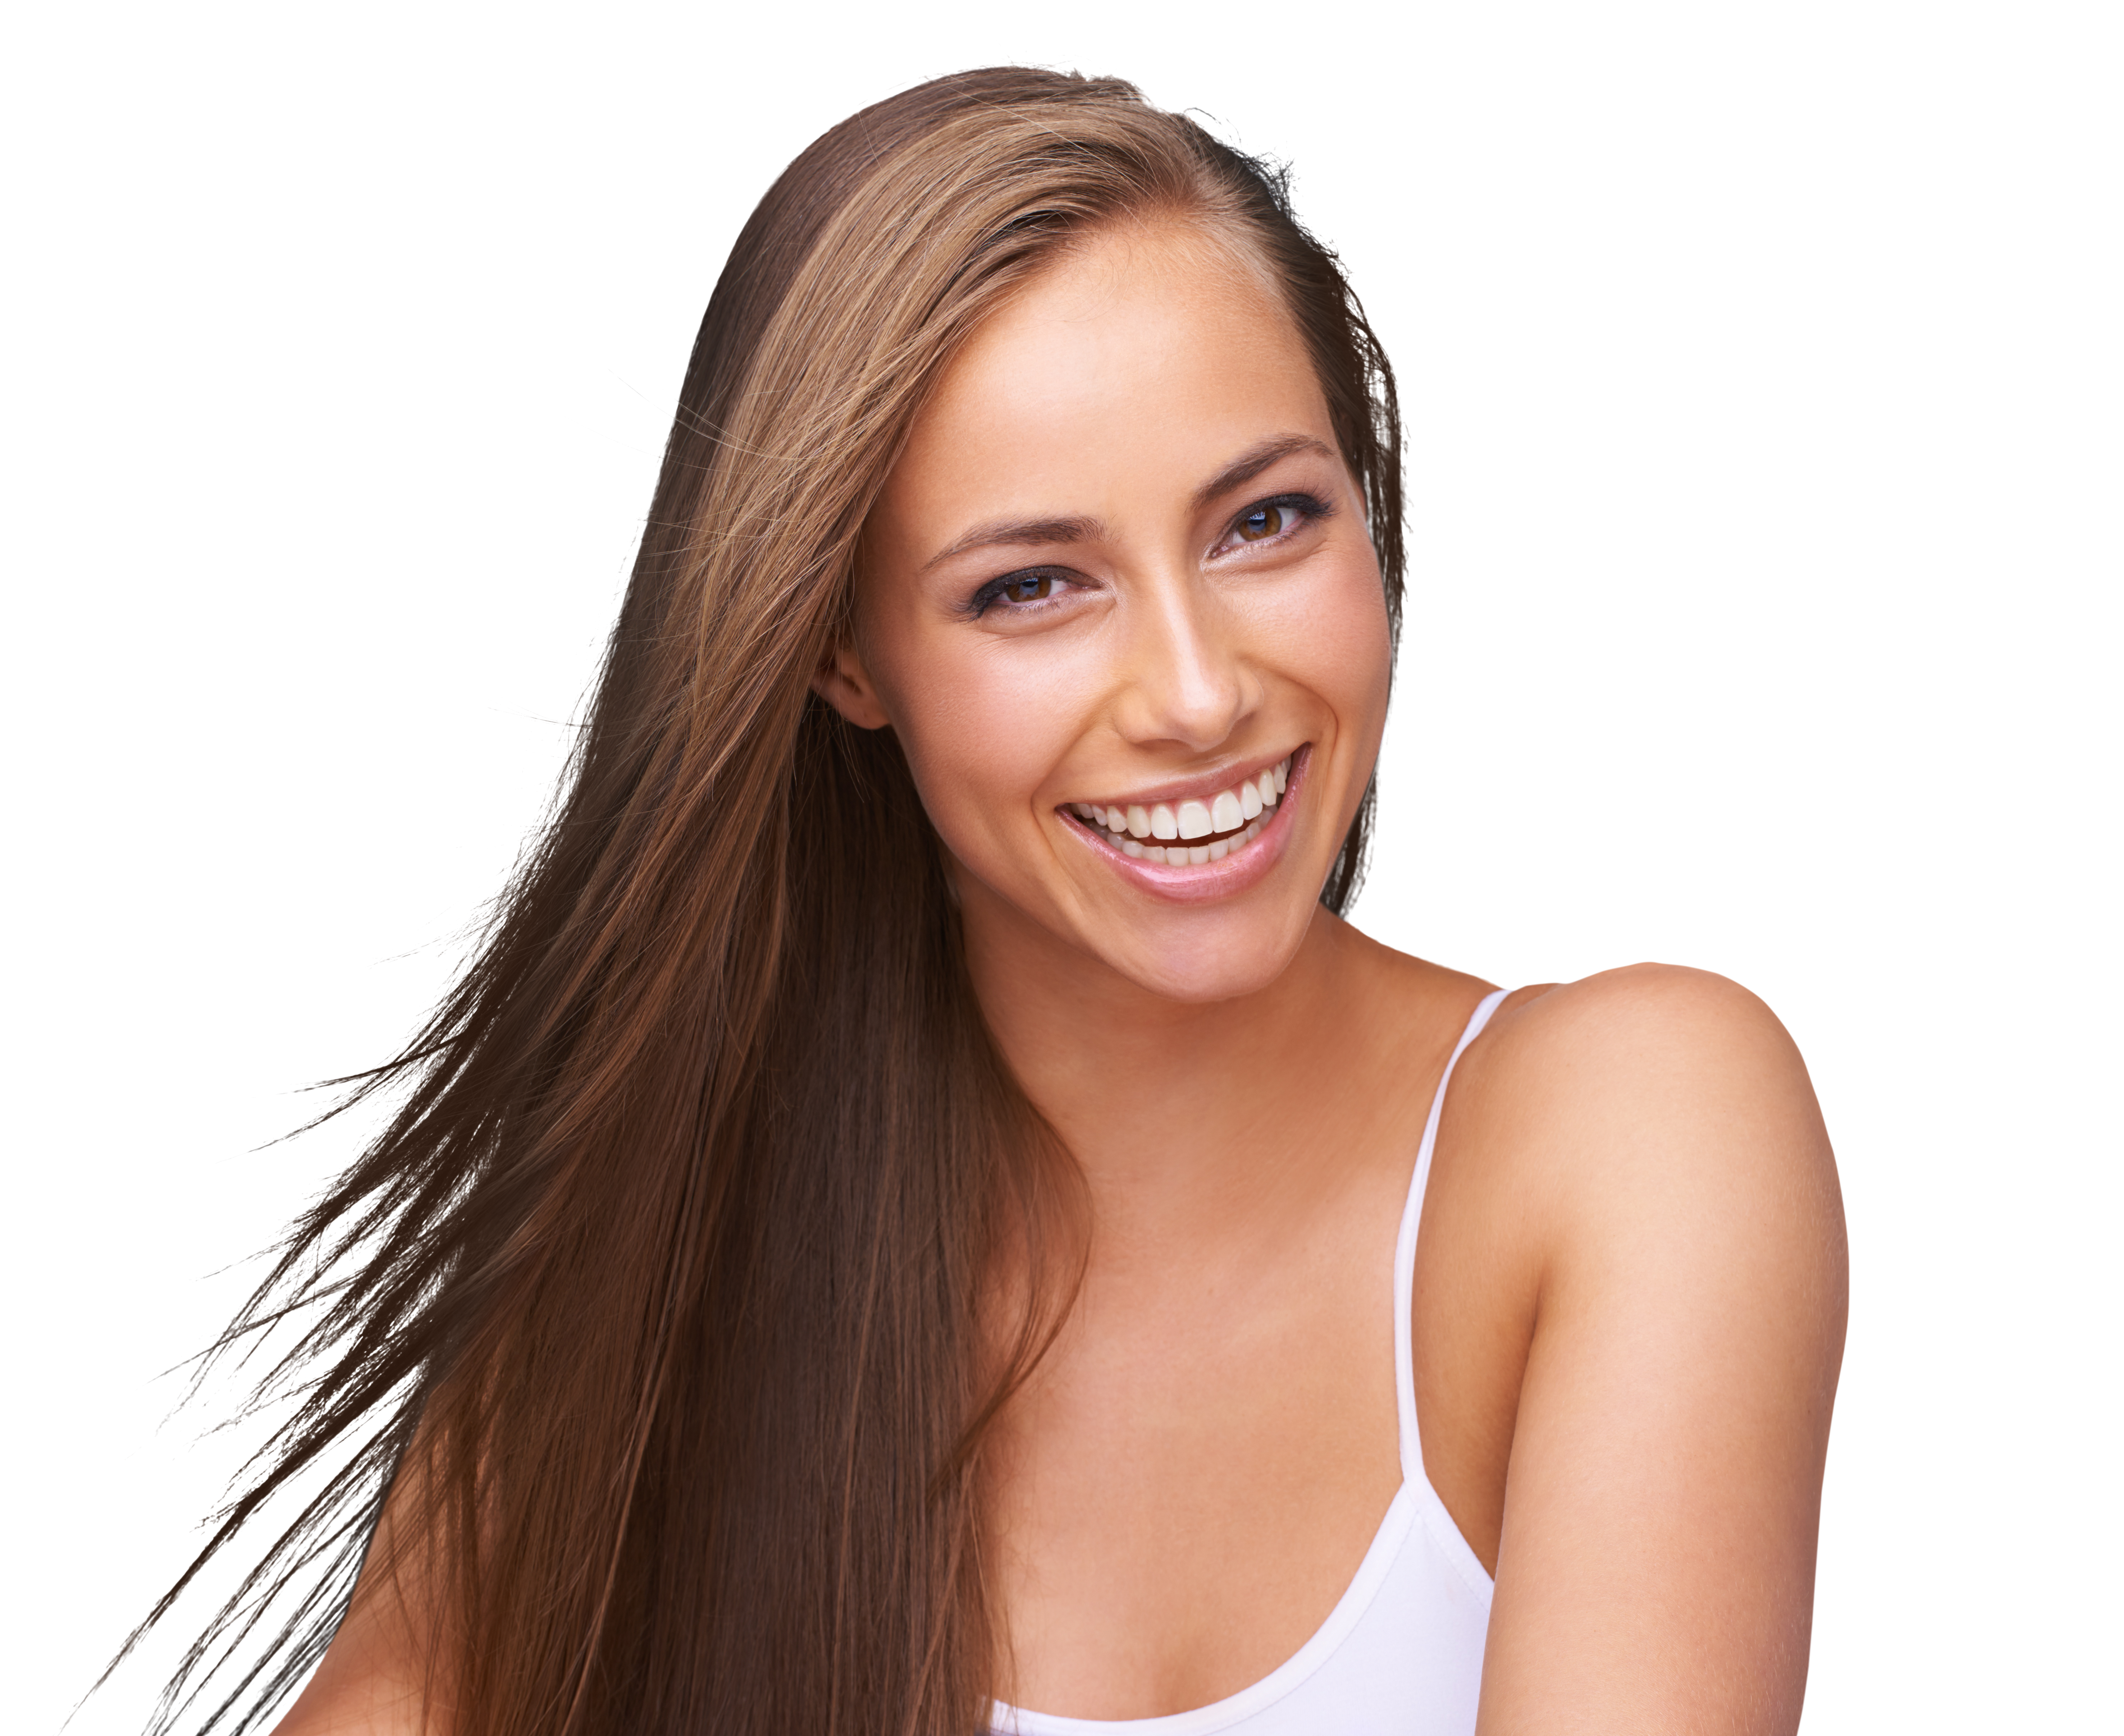 Happy caucasian women with brown eyes and long brown strait hair parted on the side wearing a white tanktop with skinny straps. She has a big smile showing her teeth